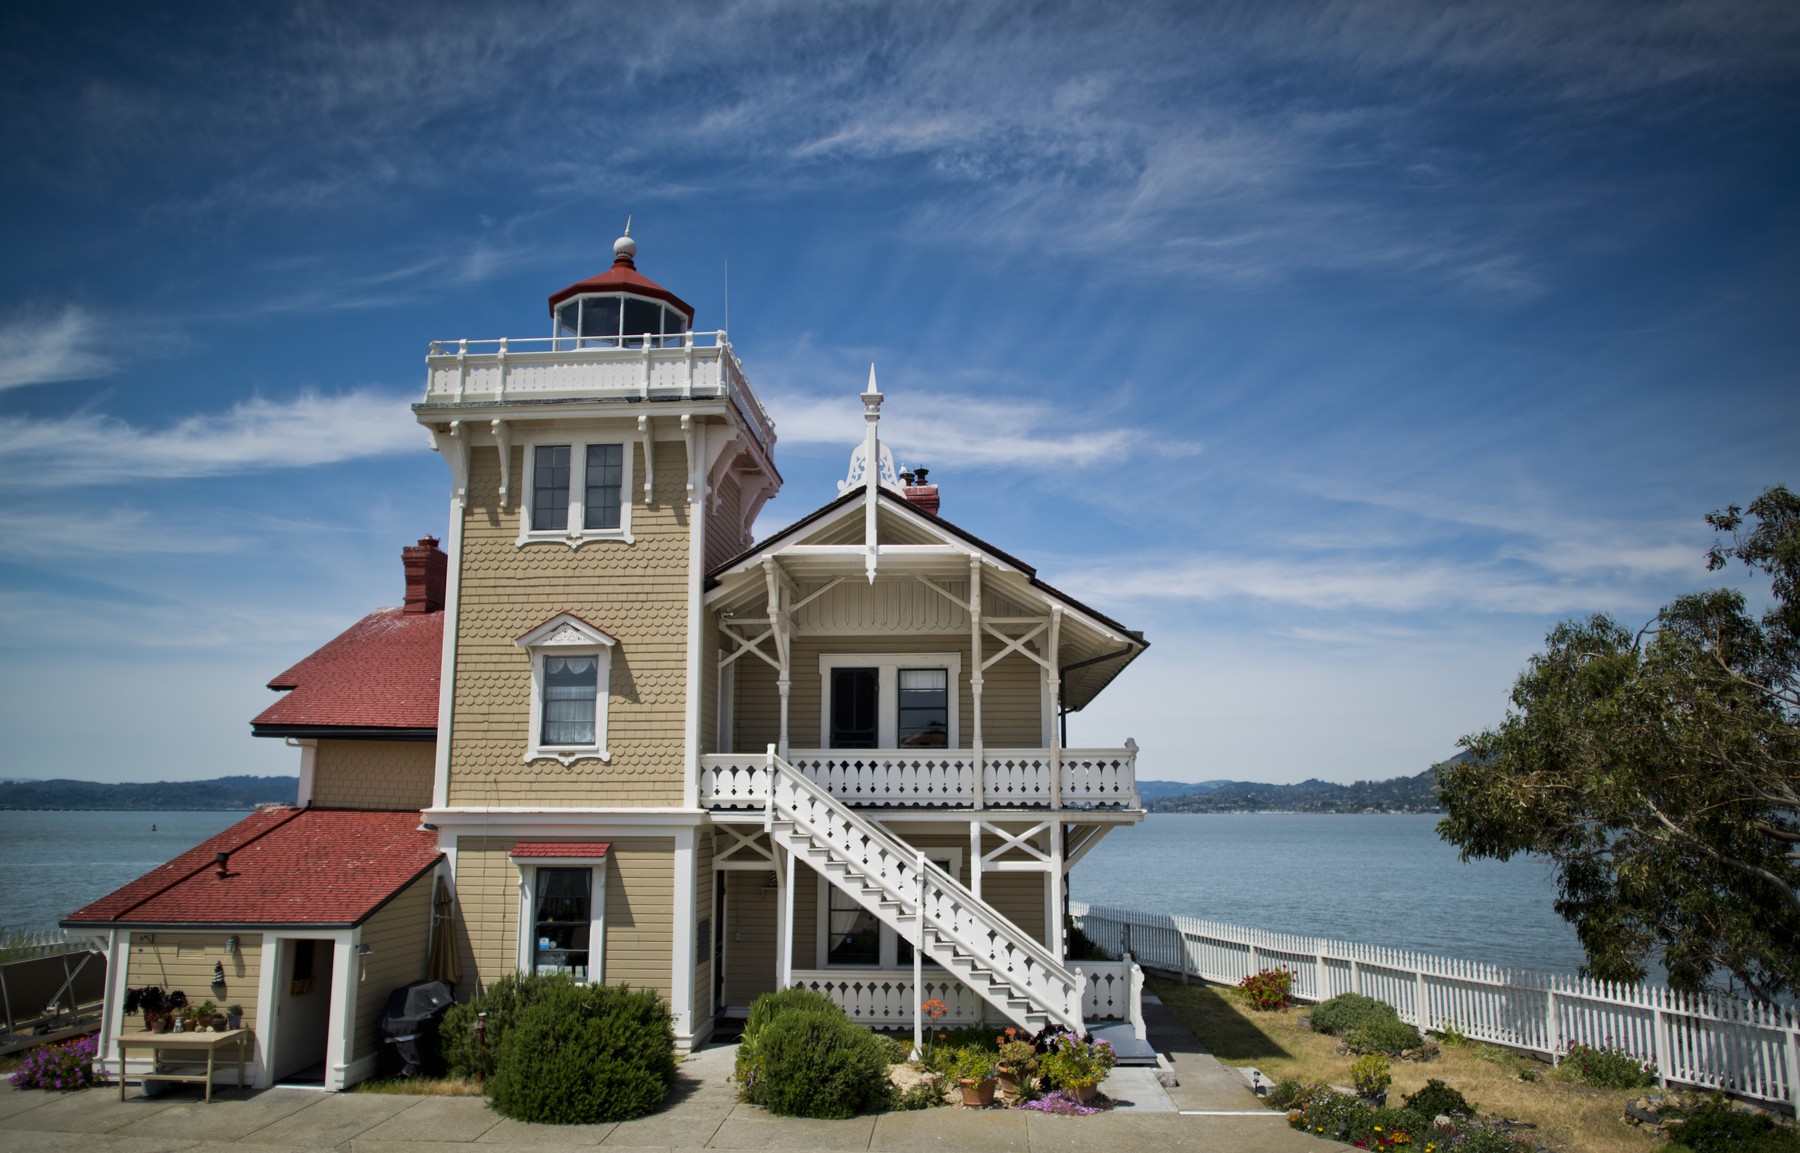 May 2, 2014 - Richmond, CA - East Brother Light Station Bed and Breakfast is a restored California Victorian Lighthouse perched atop an island in the strait that separates San Francisco and San Pablo Bays near Richmond, Calif., on Friday, May 2, 2014., Image: 193770191, License: Rights-managed, Restrictions: * USA Tabloid Rights OUT *, Model Release: no, Credit line: Manny Crisostomo / Zuma Press / Profimedia